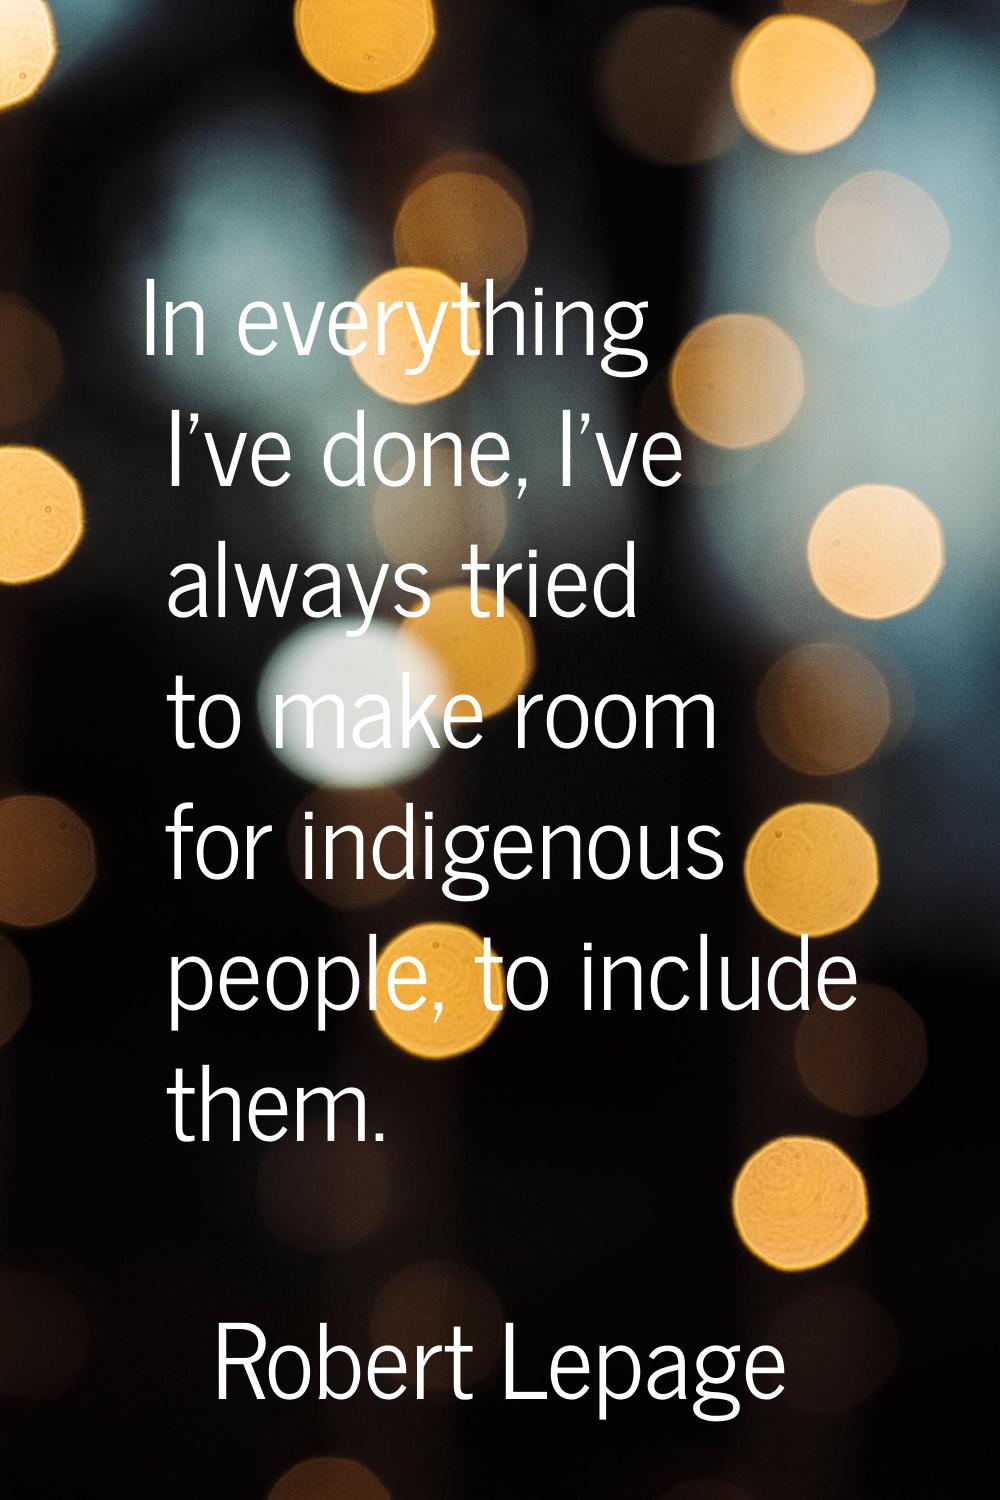 In everything I've done, I've always tried to make room for indigenous people, to include them.